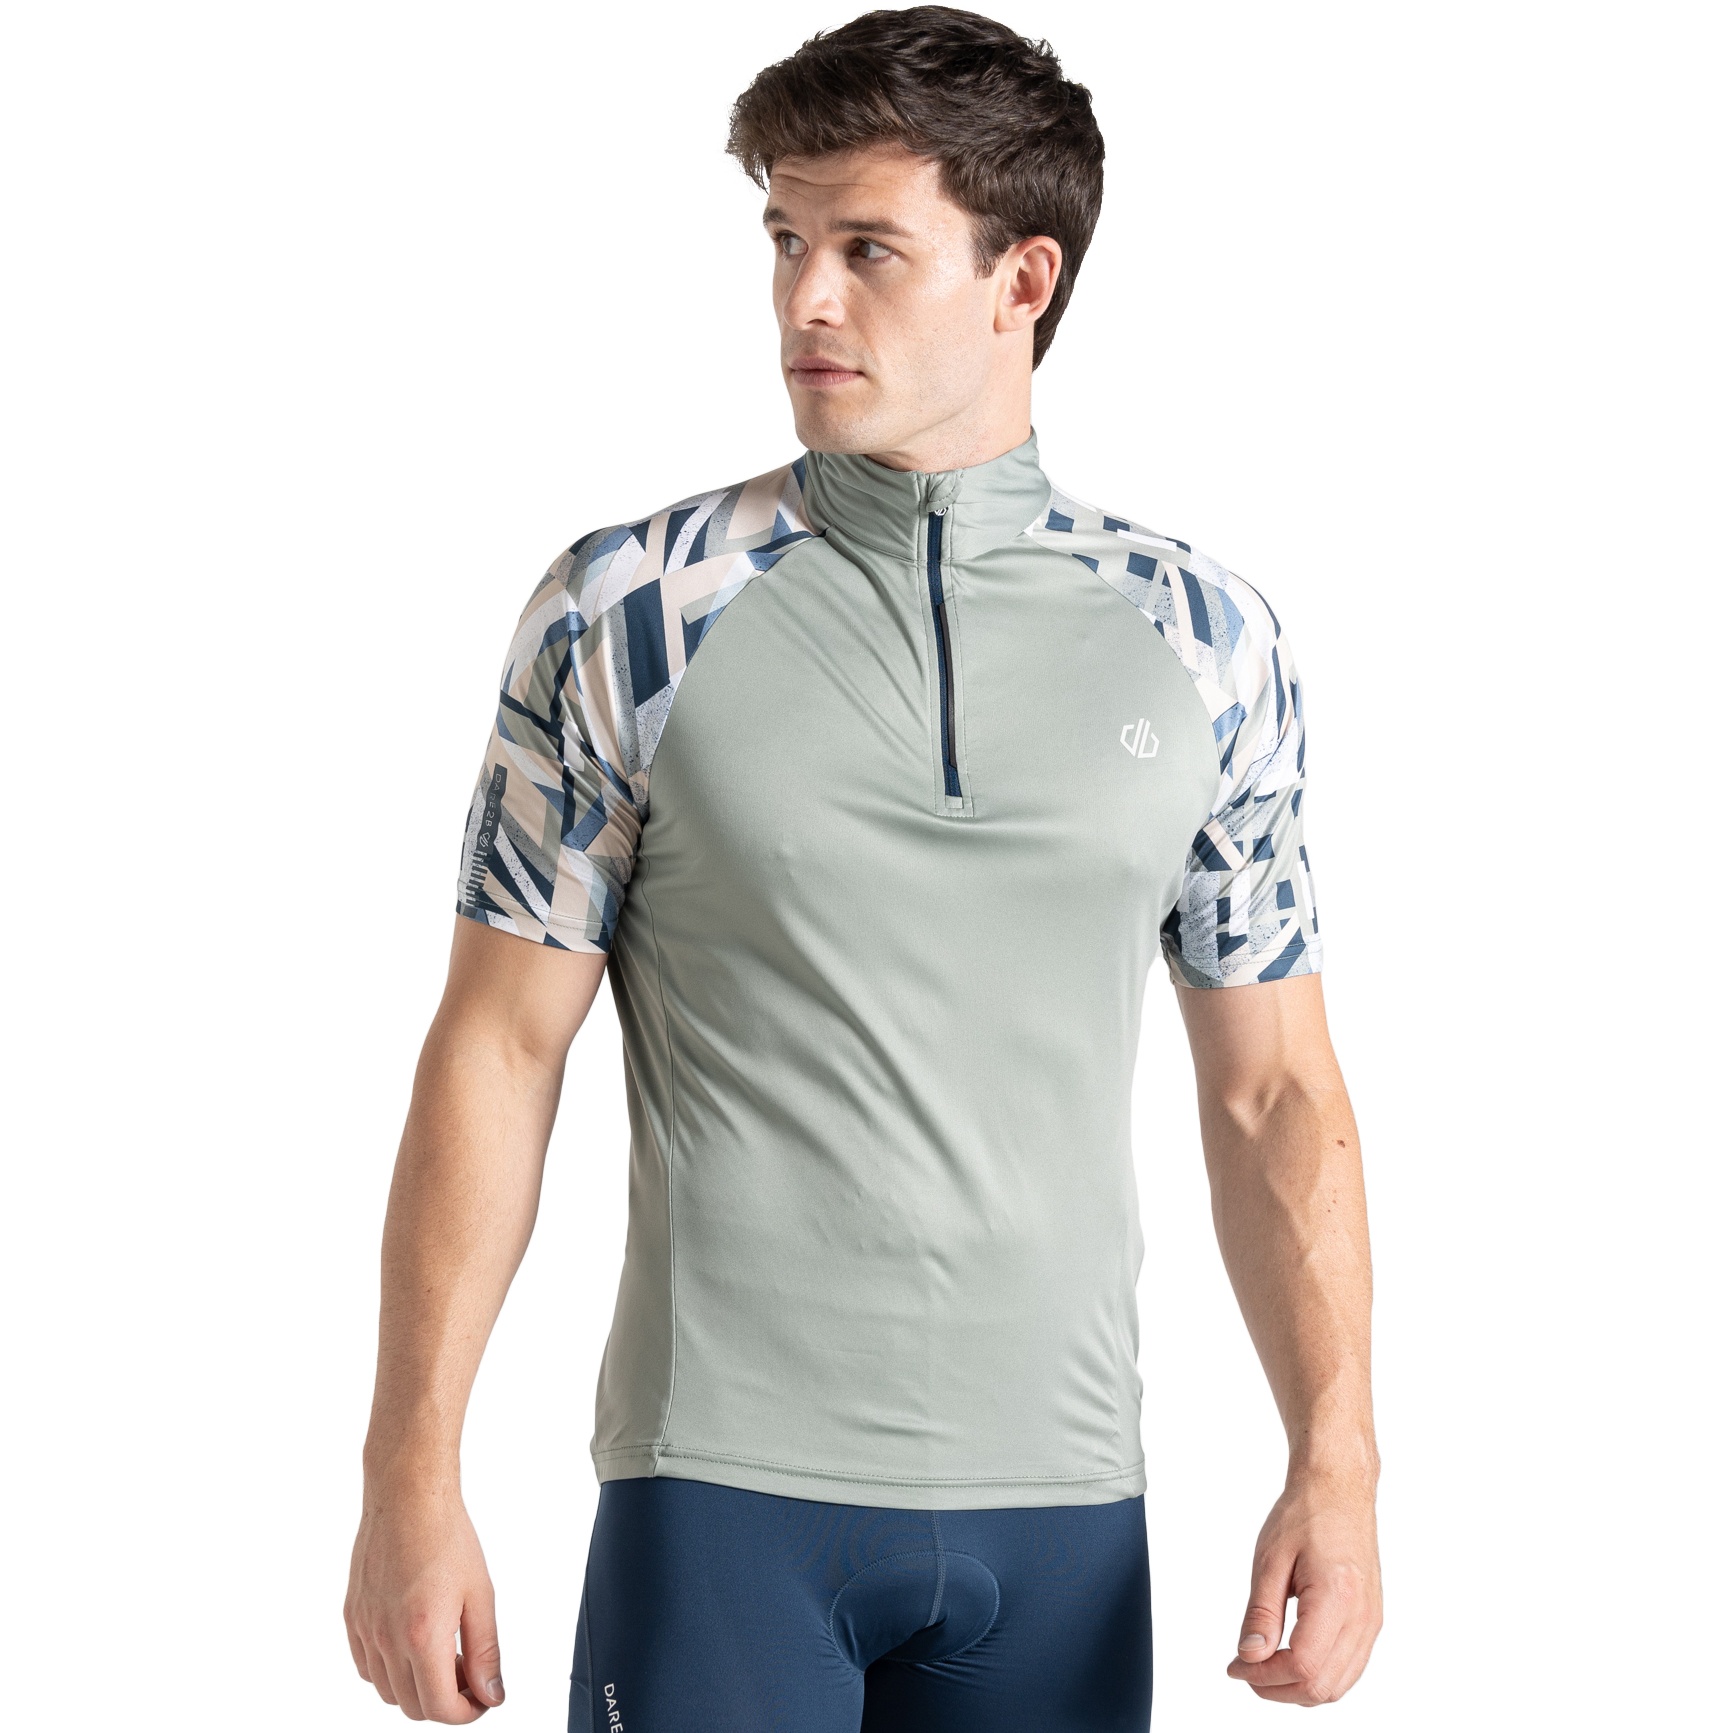 Picture of Dare 2b Riding Jersey Men - KA1 Lily Pad/Lily Pad Shift